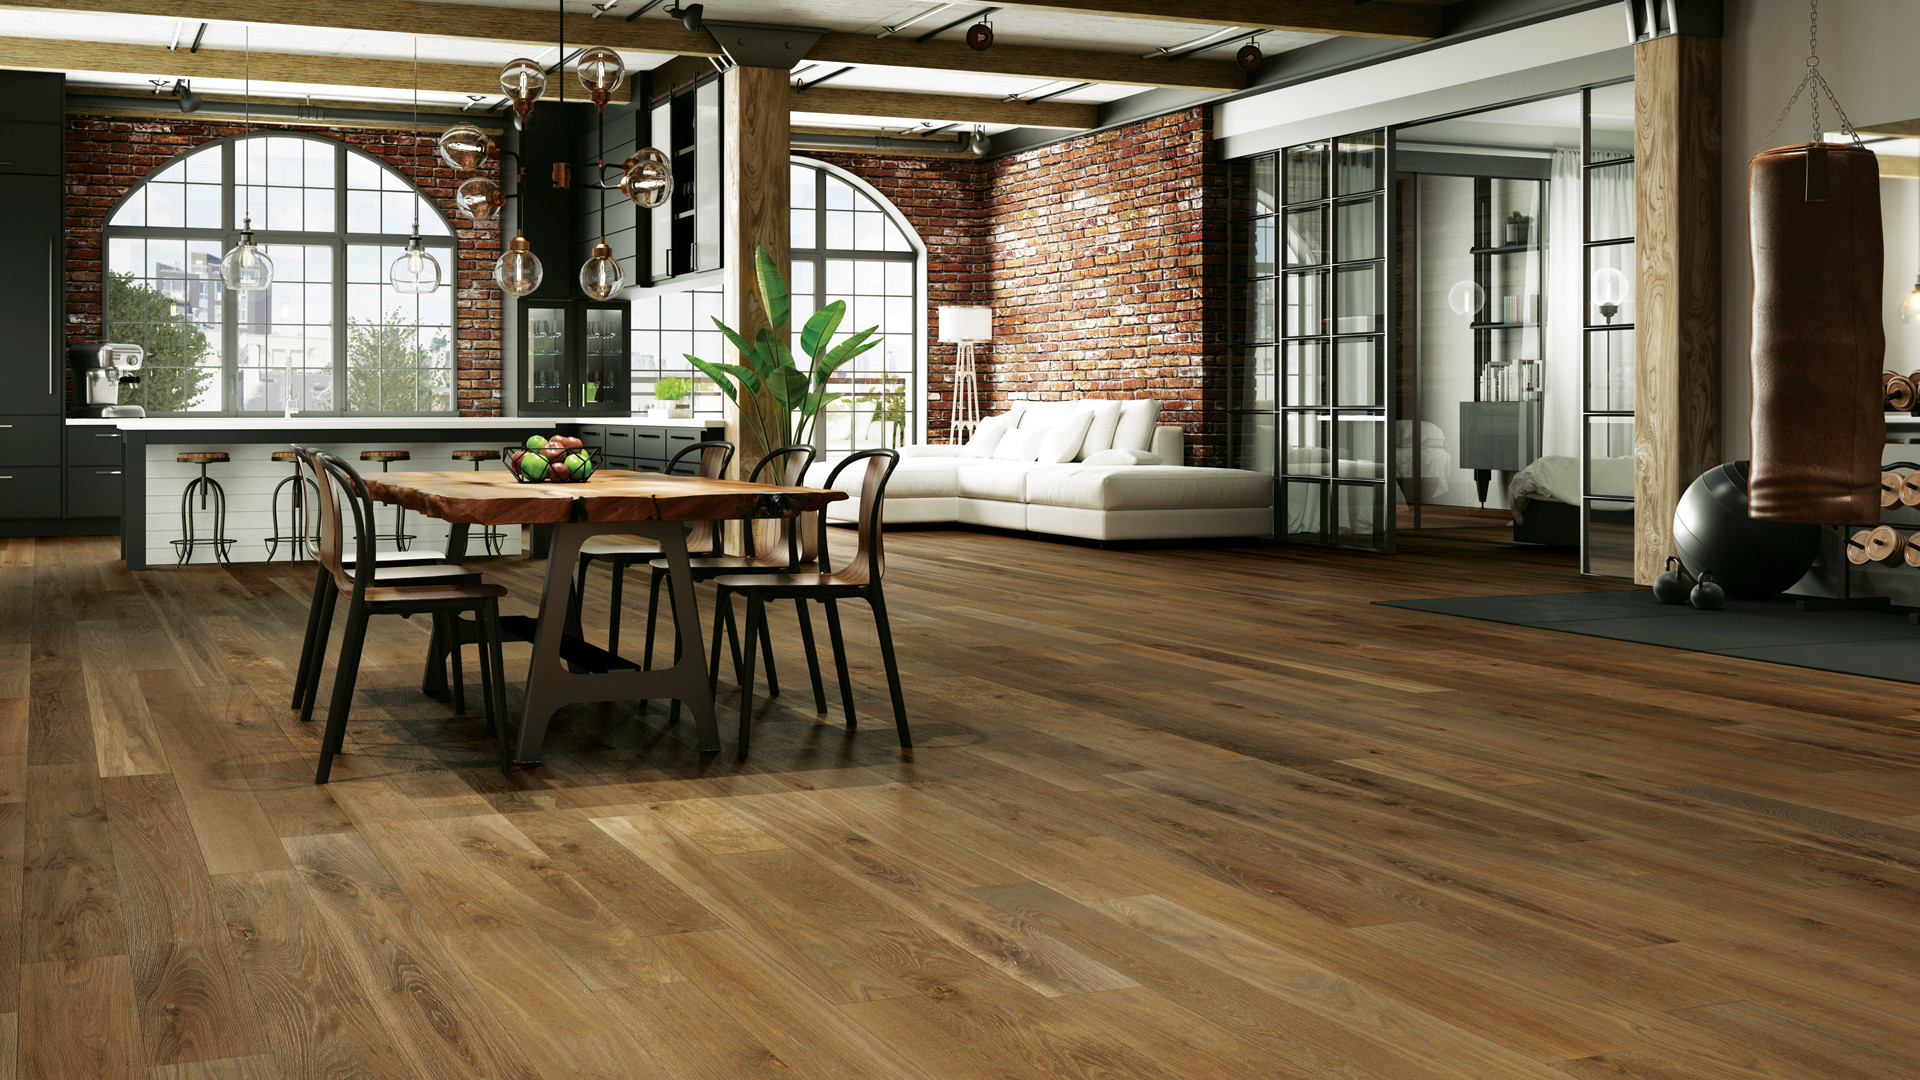 hardwood flooring companies toronto of 4 latest hardwood flooring trends of 2018 lauzon flooring with regard to combined with a wire brushed texture and an ultra matte sheen these new 7a½ wide white oak hardwood floors will definitely add character to your home